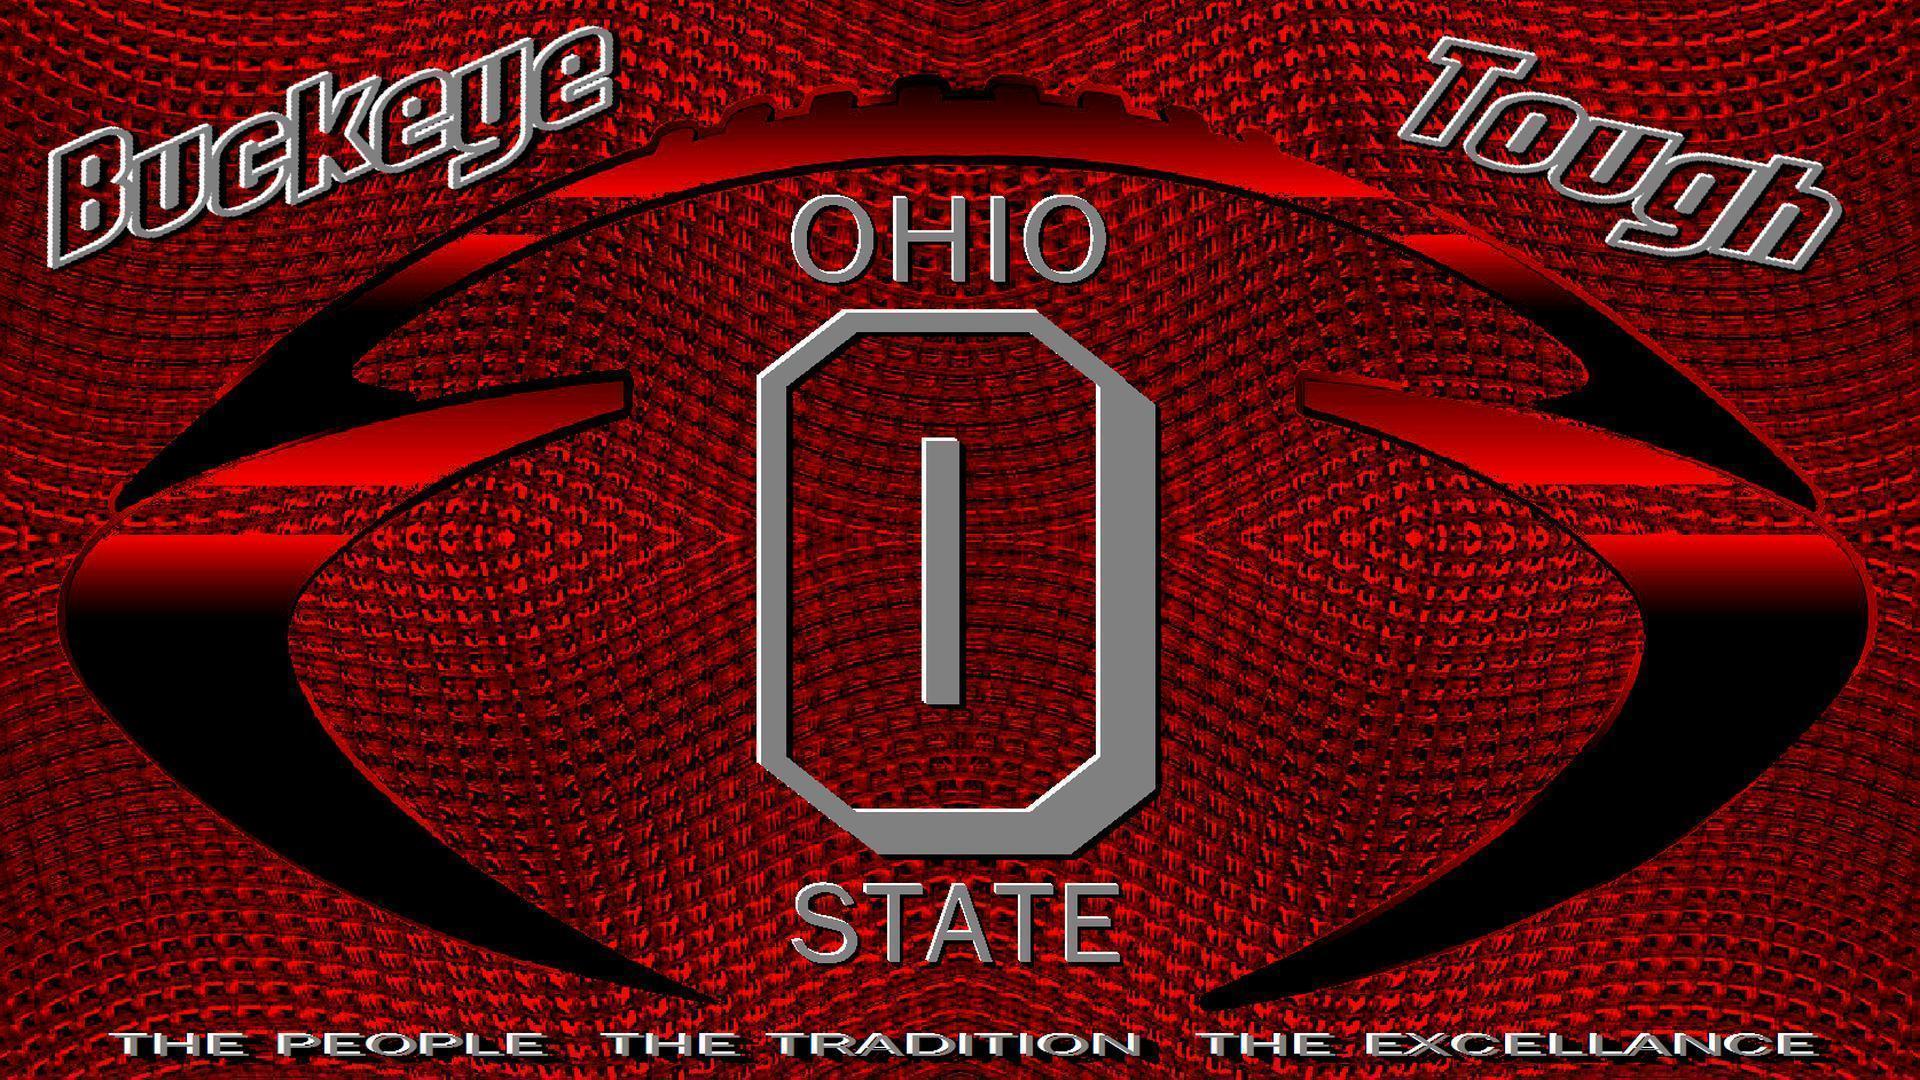 Ohio State Wallpapers 25096 Wallpapers HD